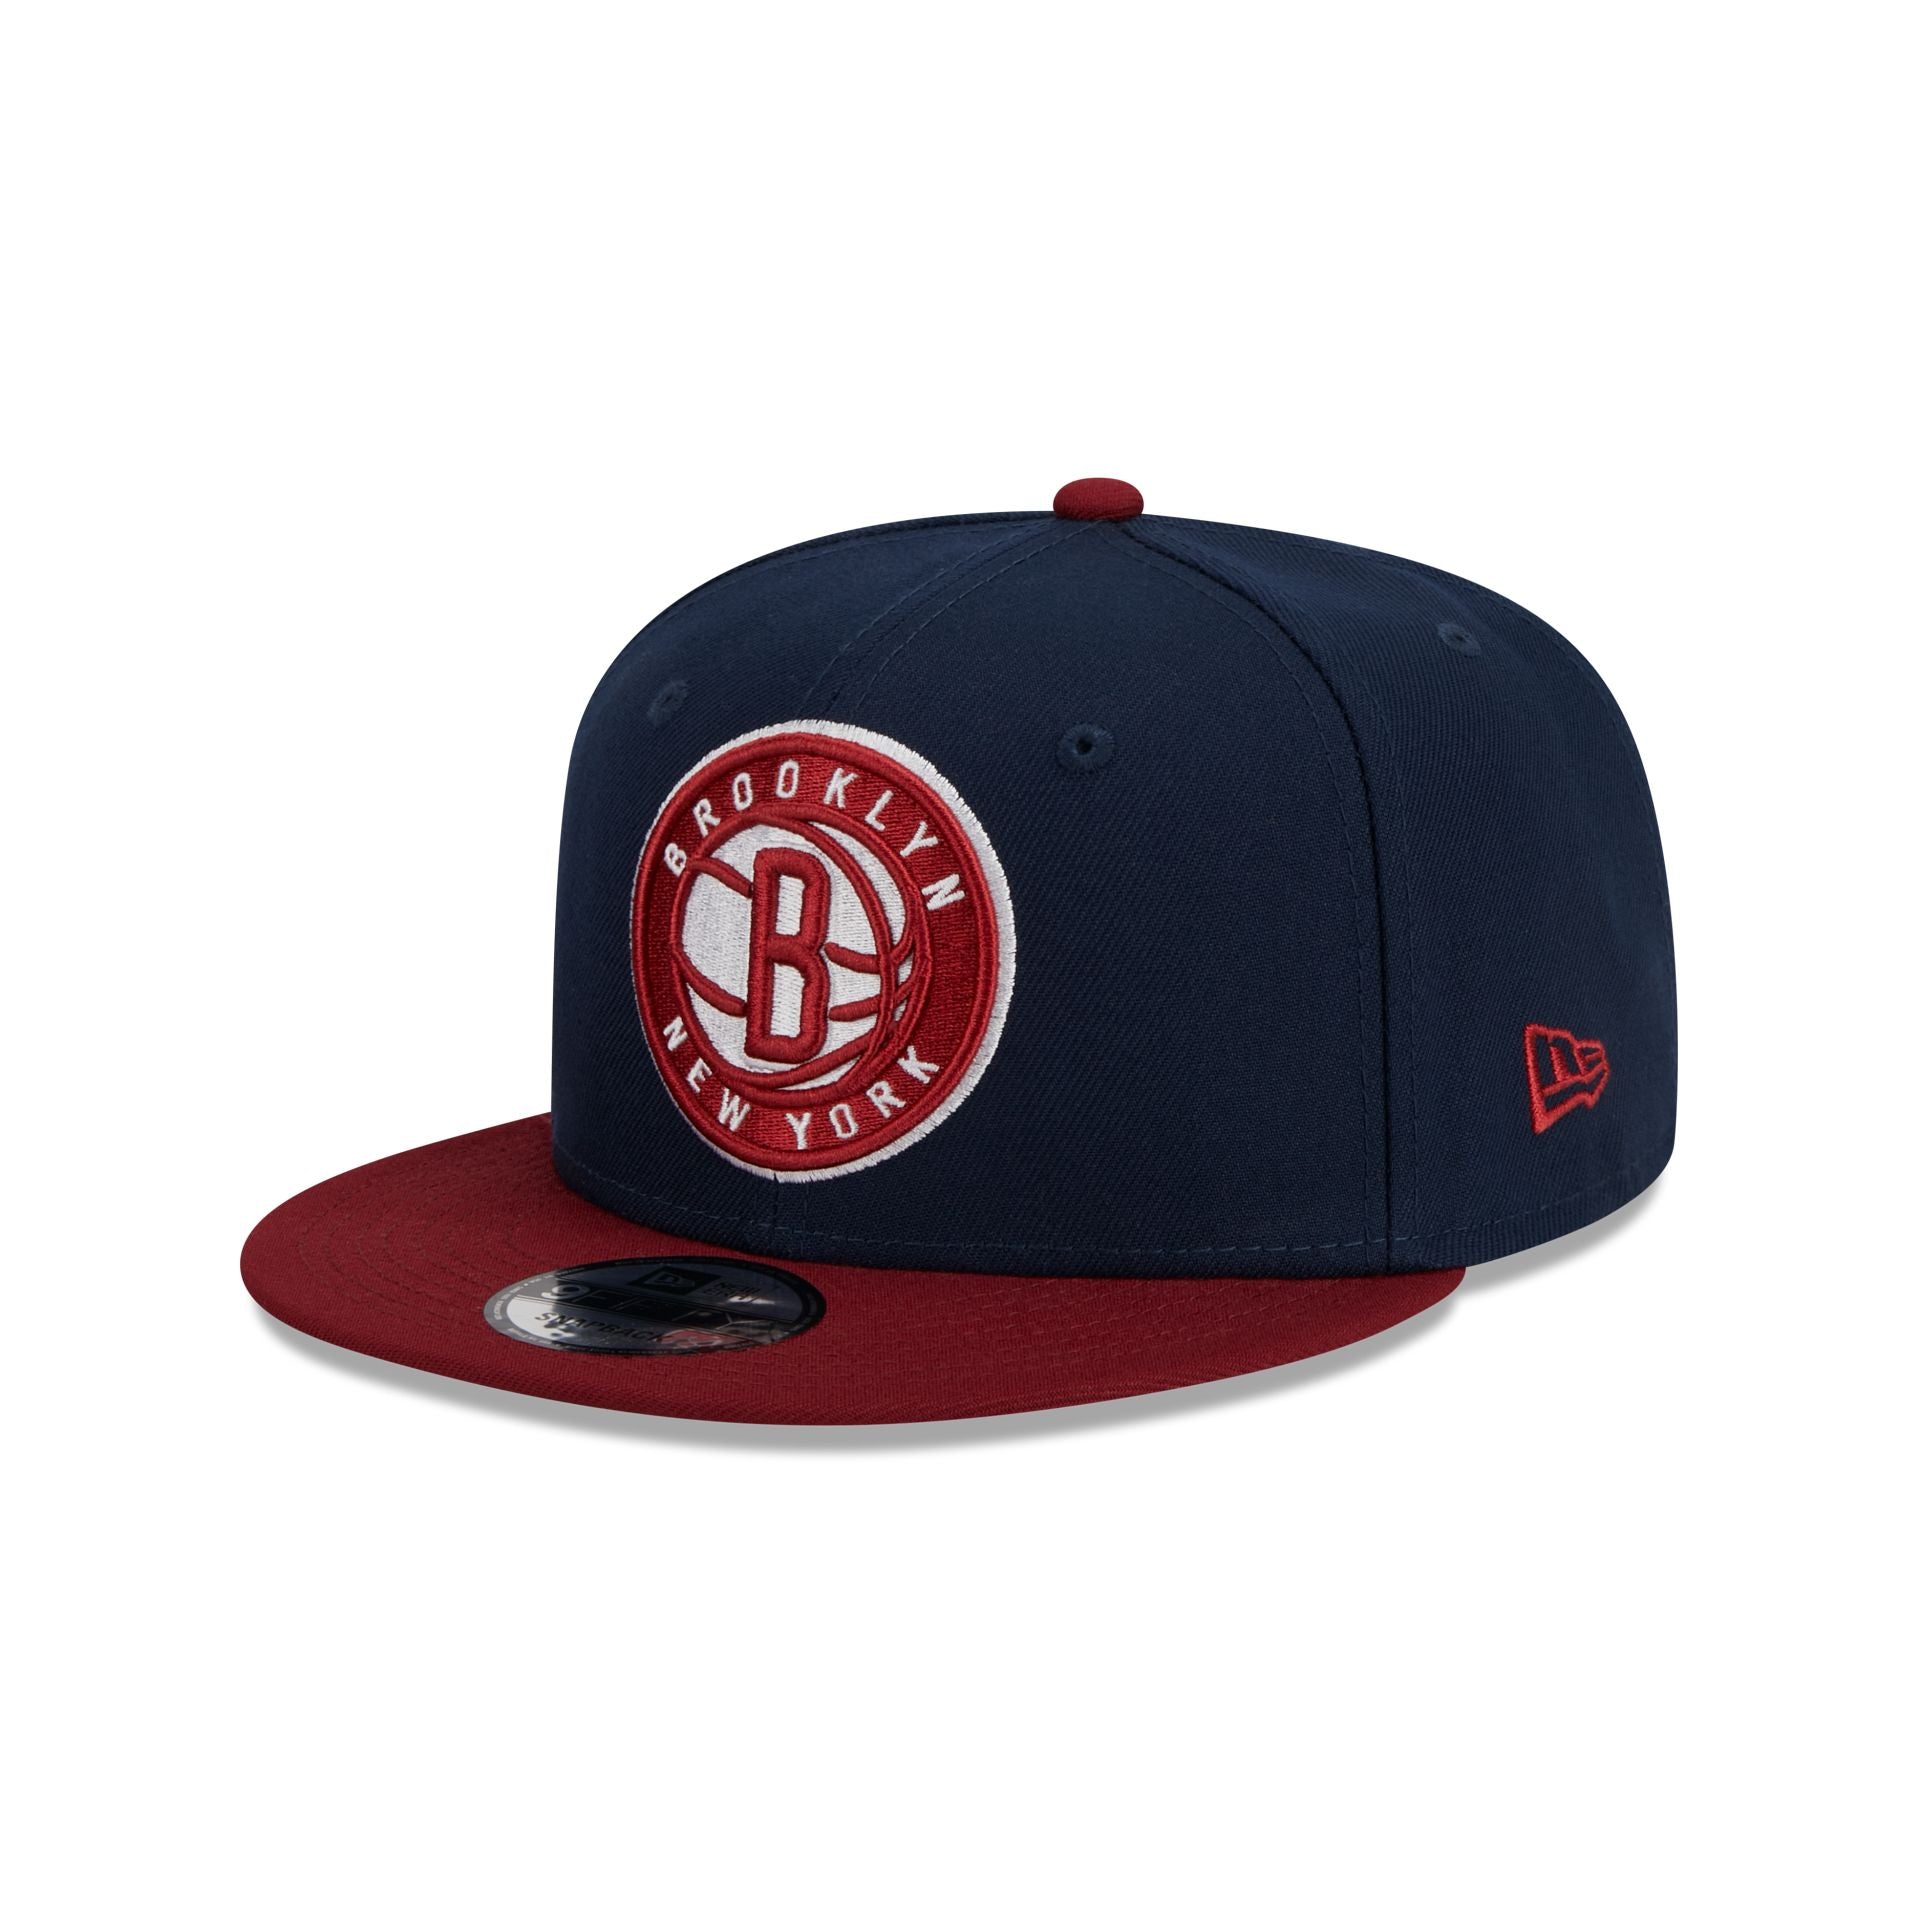 Brooklyn Nets Color Pack Navy 9FIFTY Snapback Hat, Blue, NBA by New Era